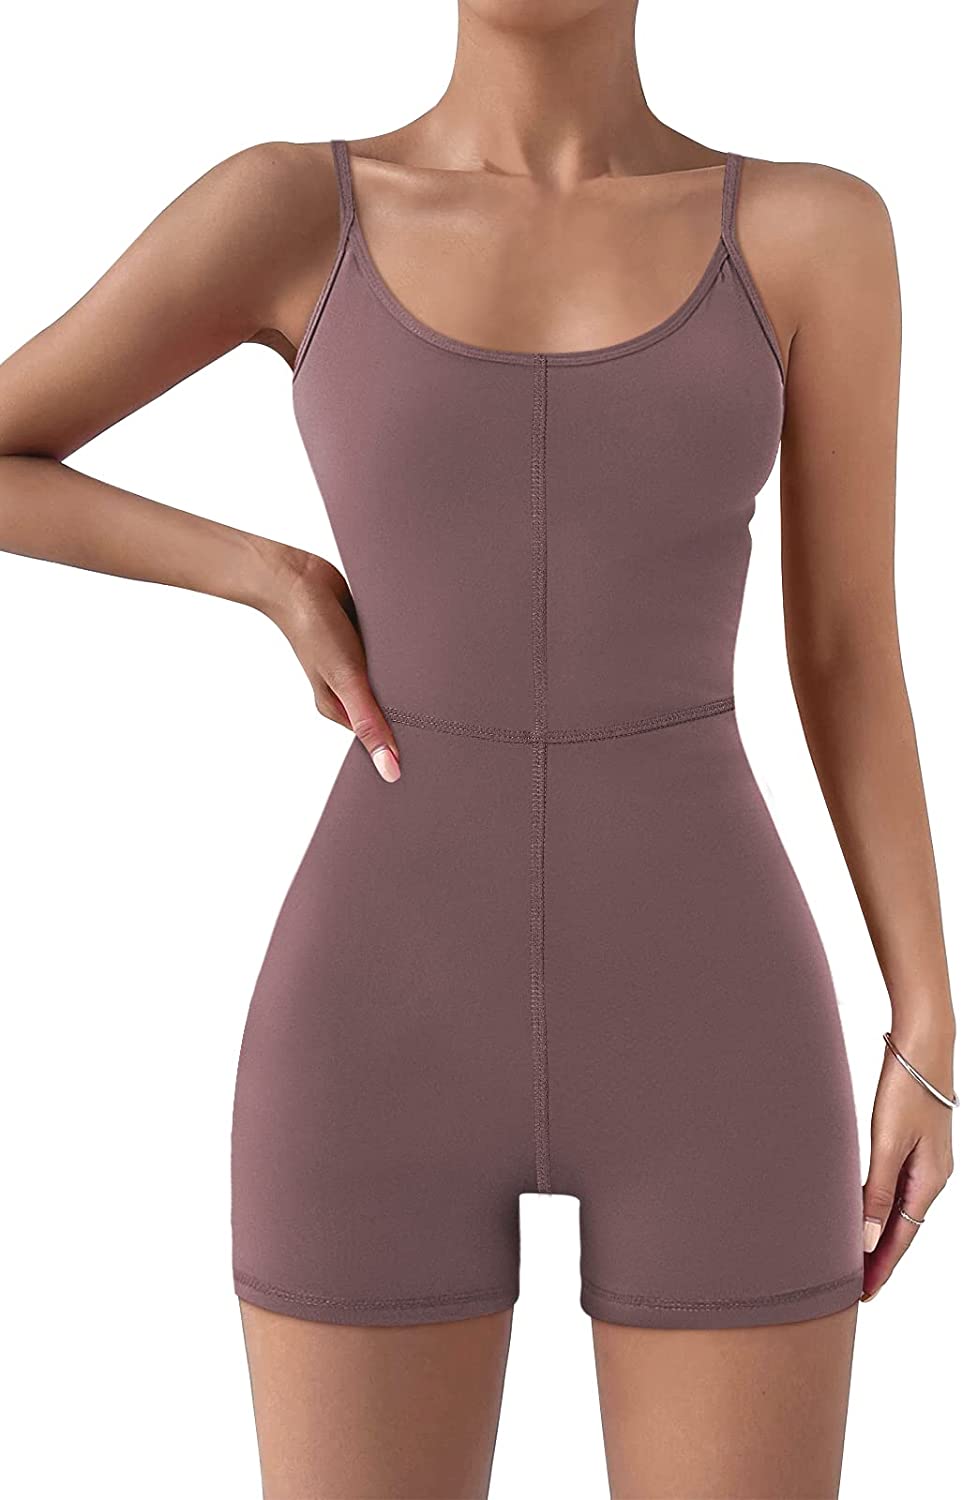  Womens Sexy Unitard Bodysuit Stretch Workout Rompers